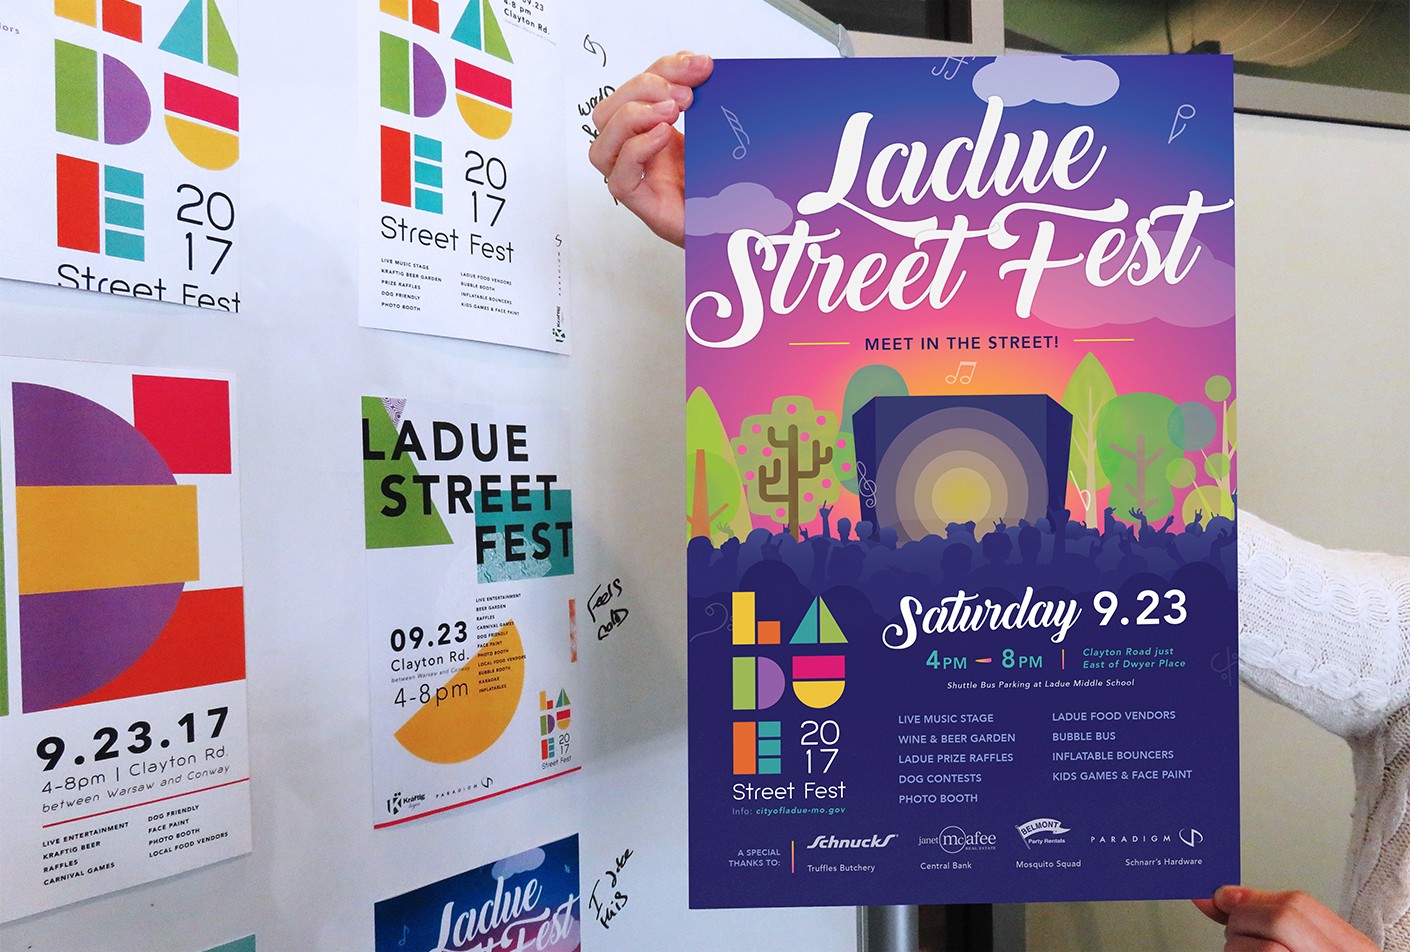 Our design process from the Ladue Street Fest poster, comparing the final product with several of the initial design concepts.